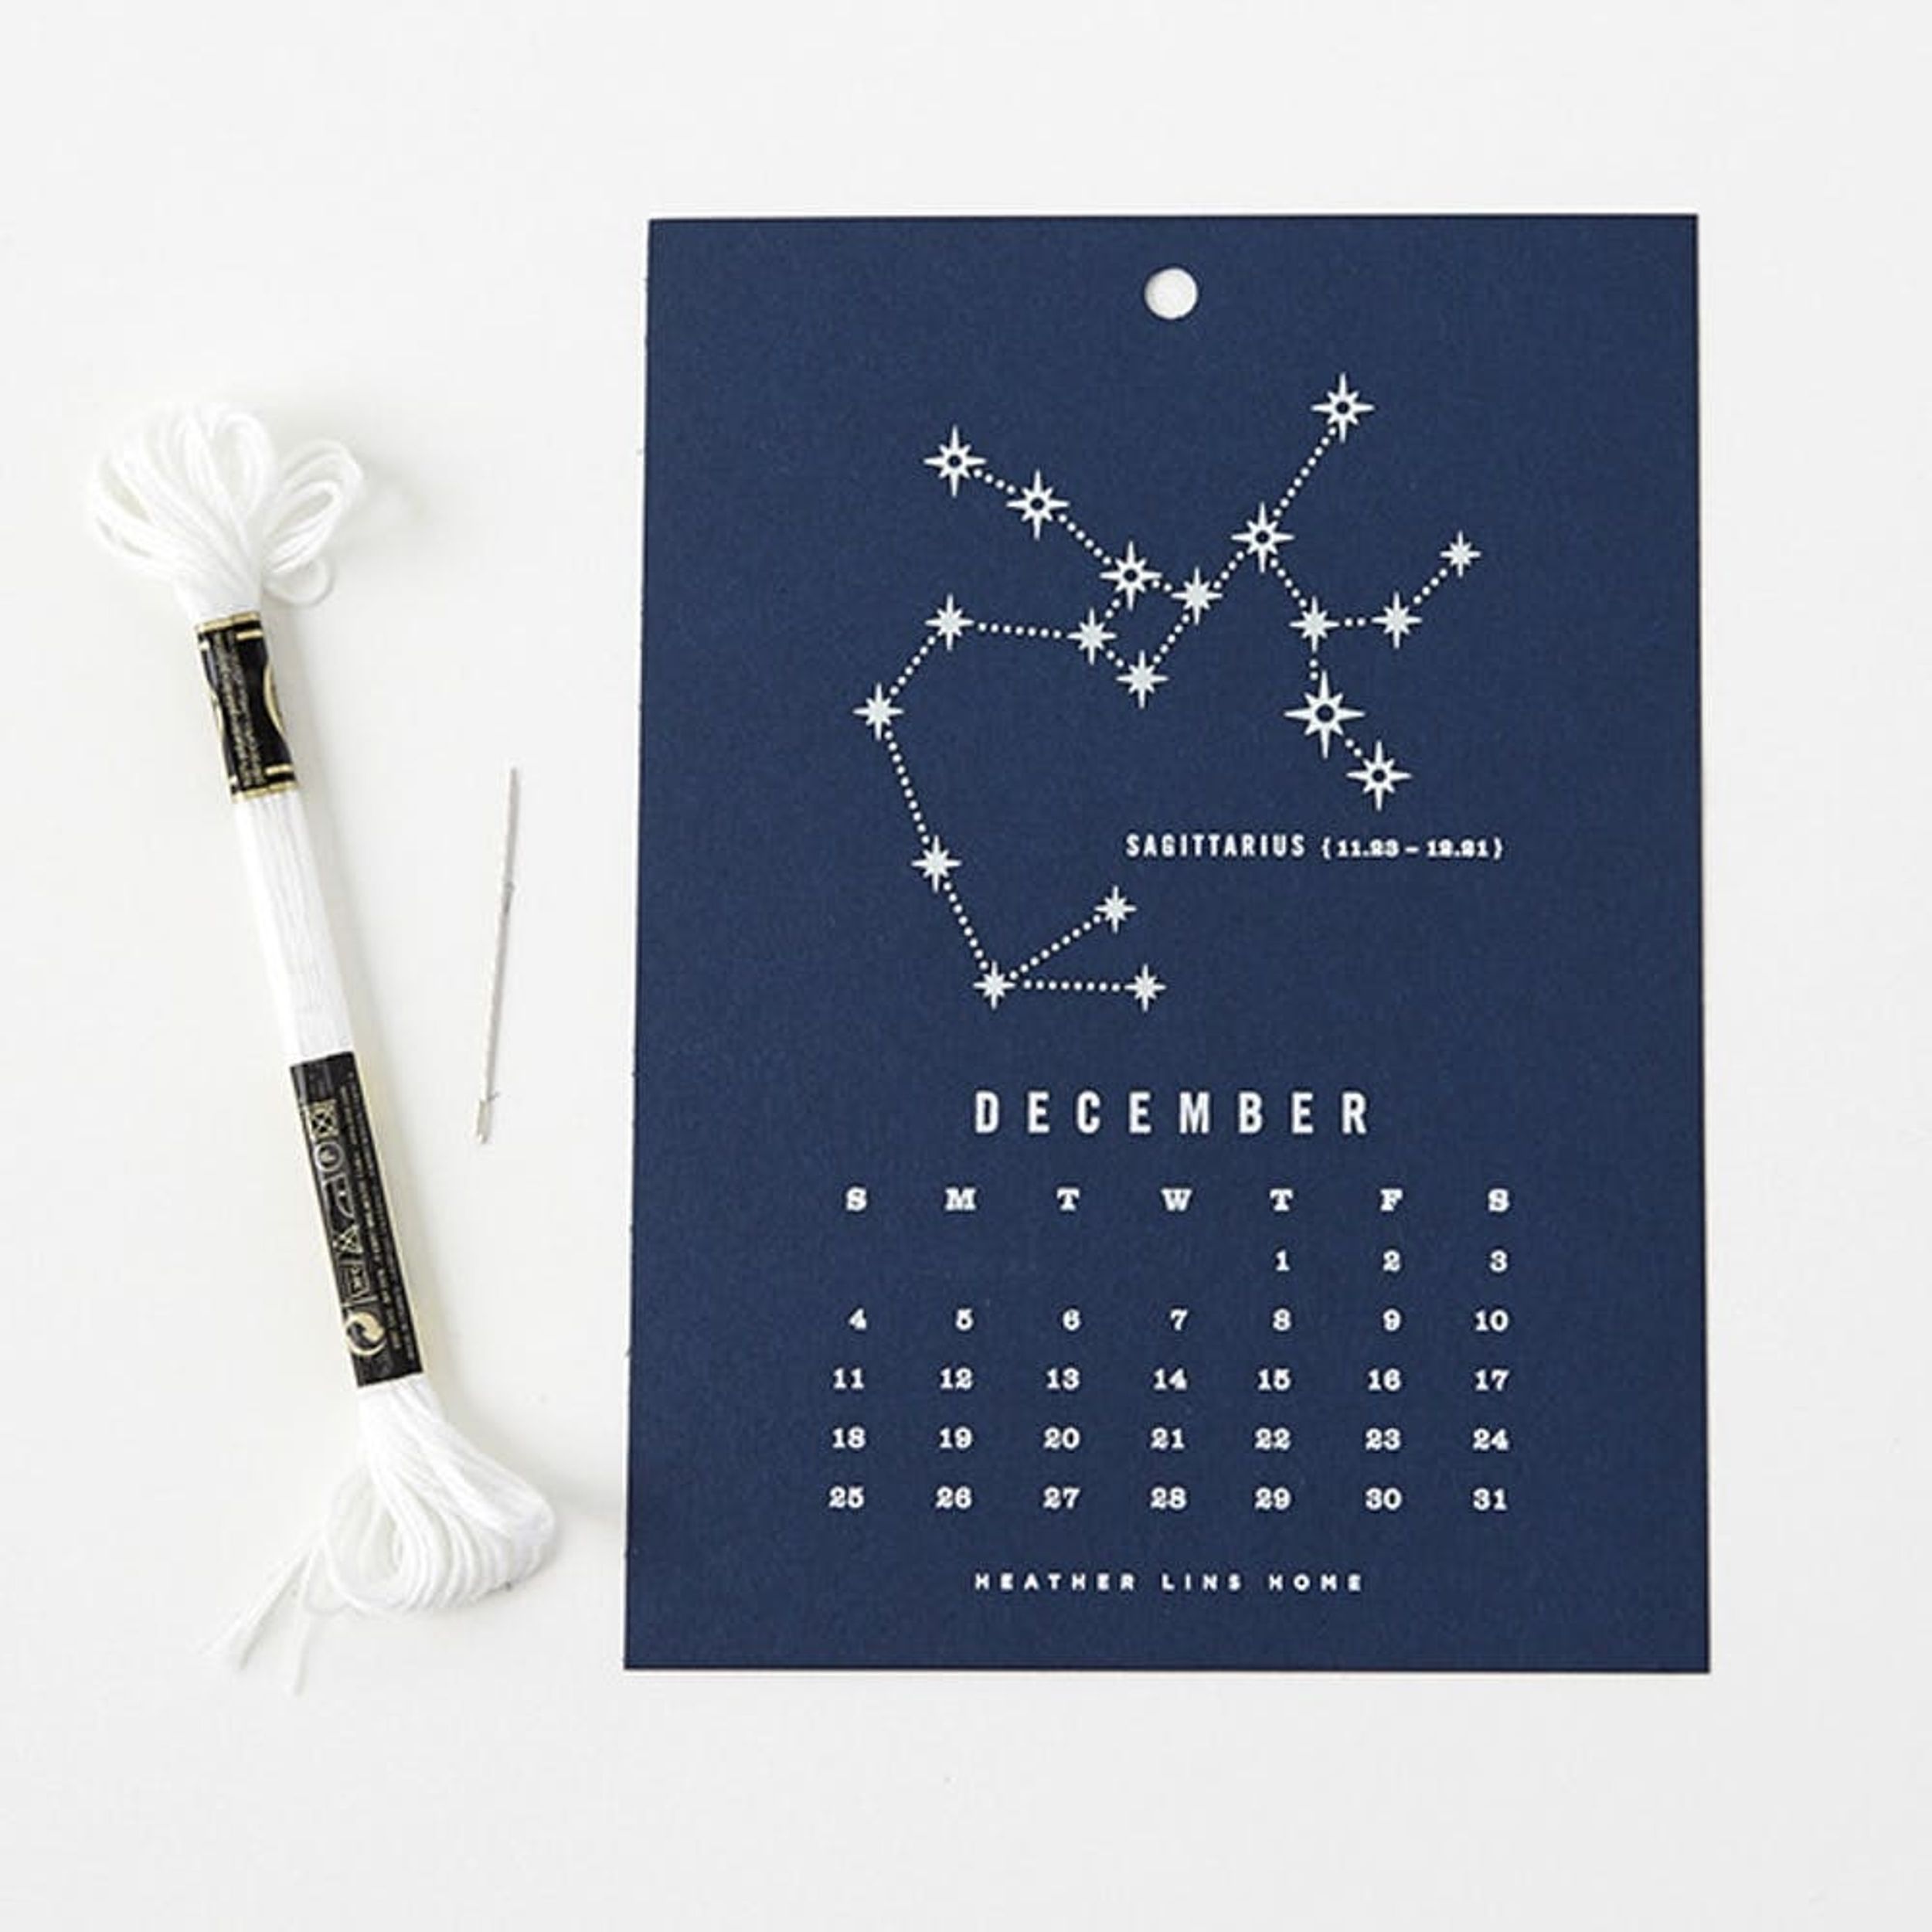 10 Pretty Planners + Cool Calendars to Organize Your Life